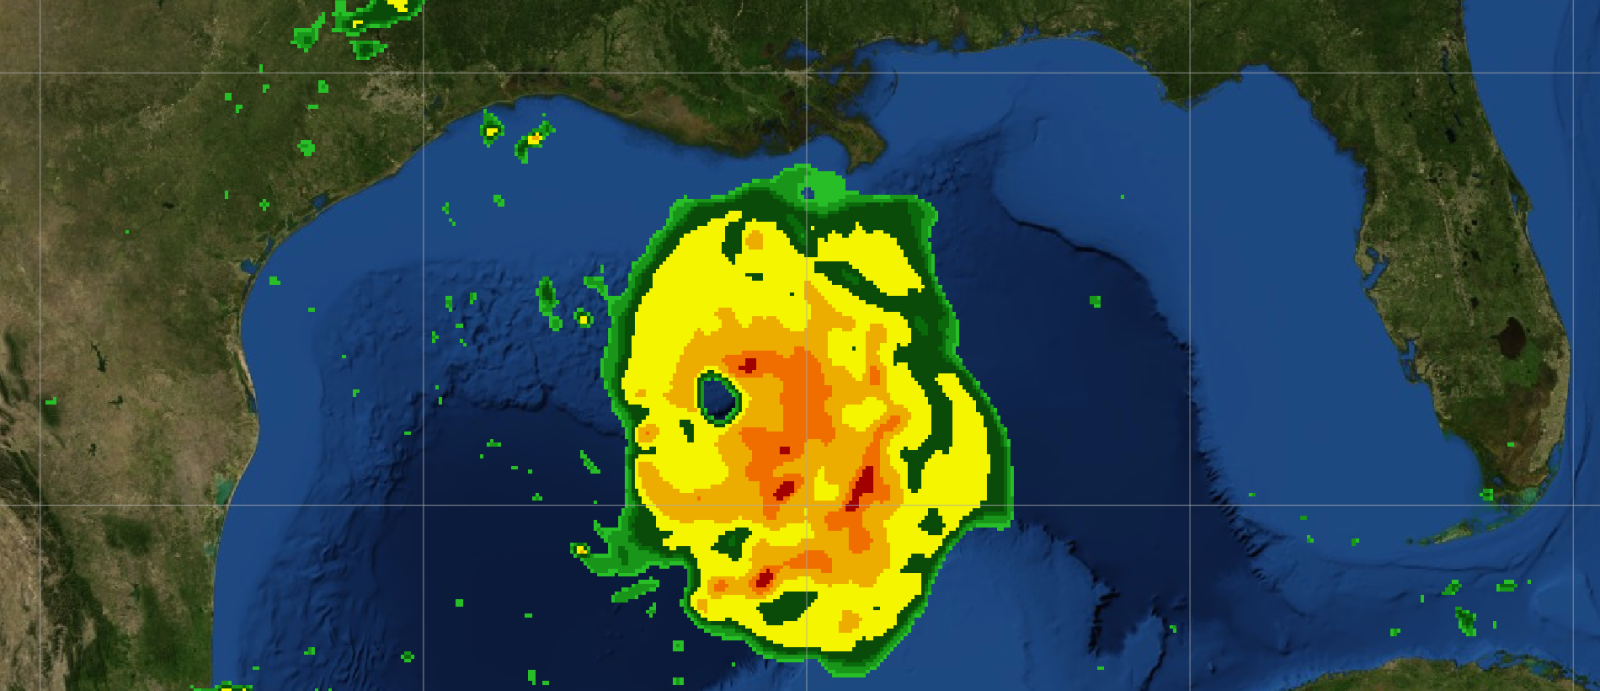 A radar-like image showing a large hurricane in the gulf of mexico. The storm is colored by rain/intensity, showing green bands on the outside, and yellow and orange in the interior. The water is blue and the nearby land is green.